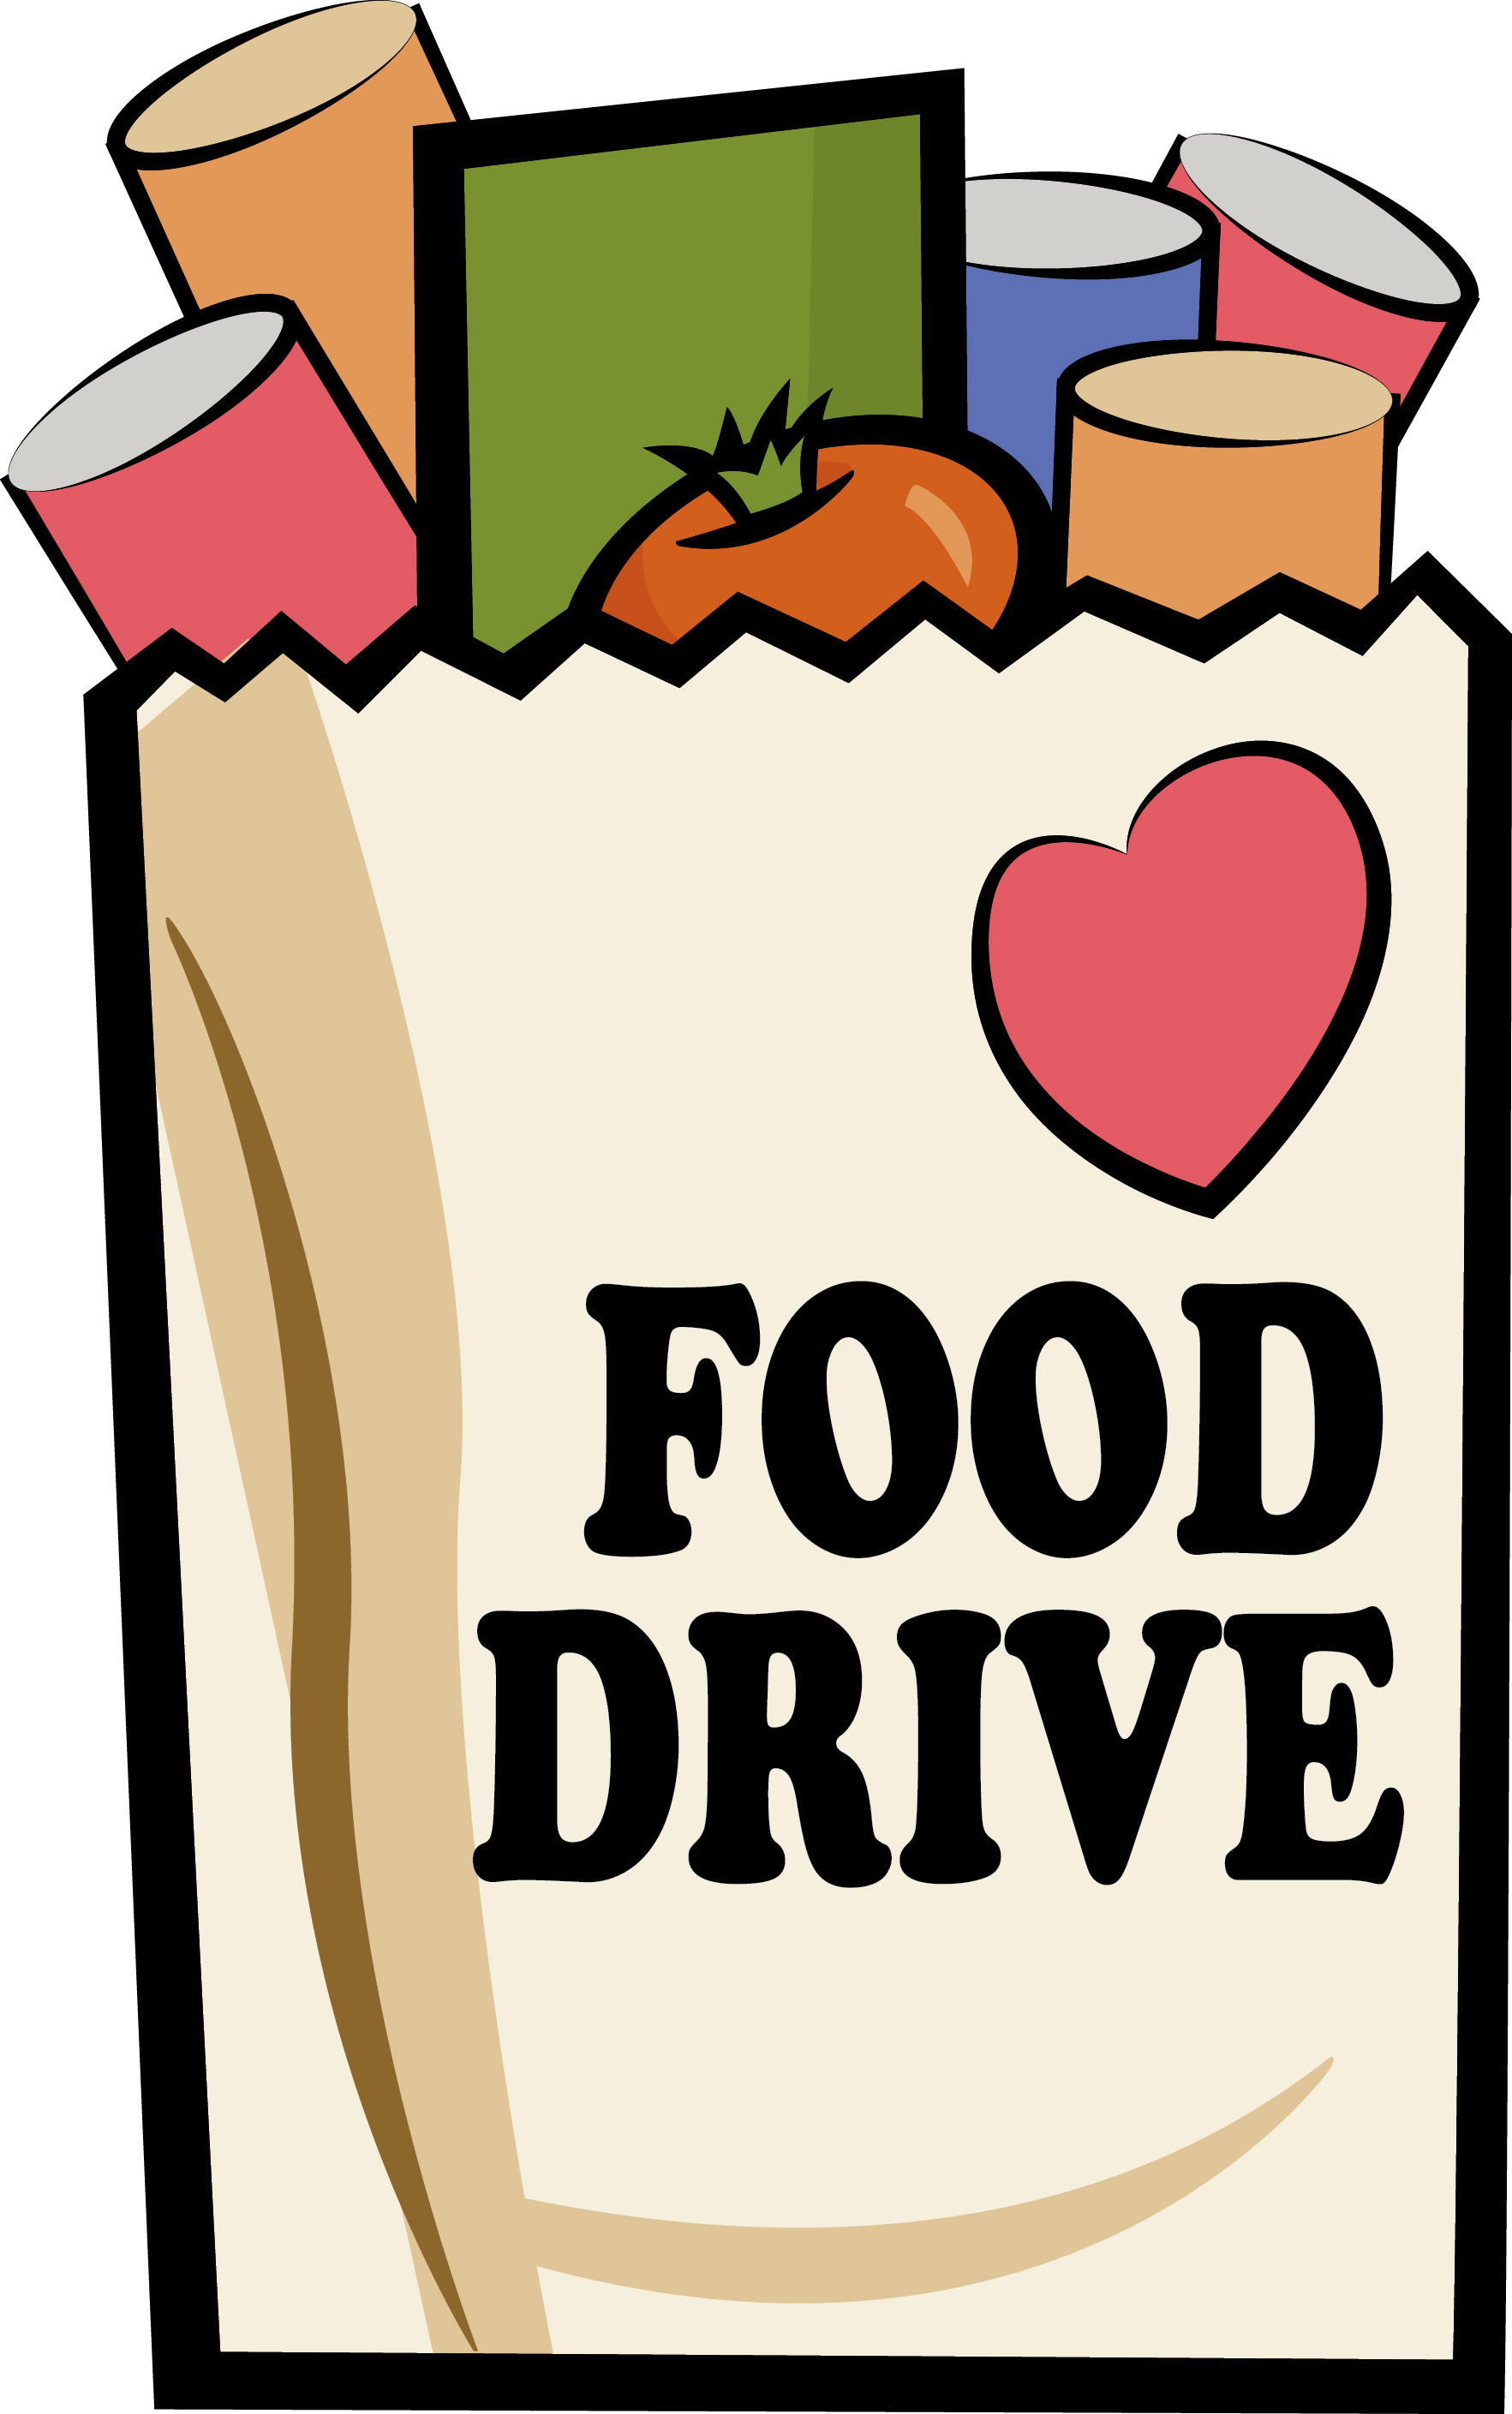 free clipart food drive - Google Search Within Food Drive Flyer Template